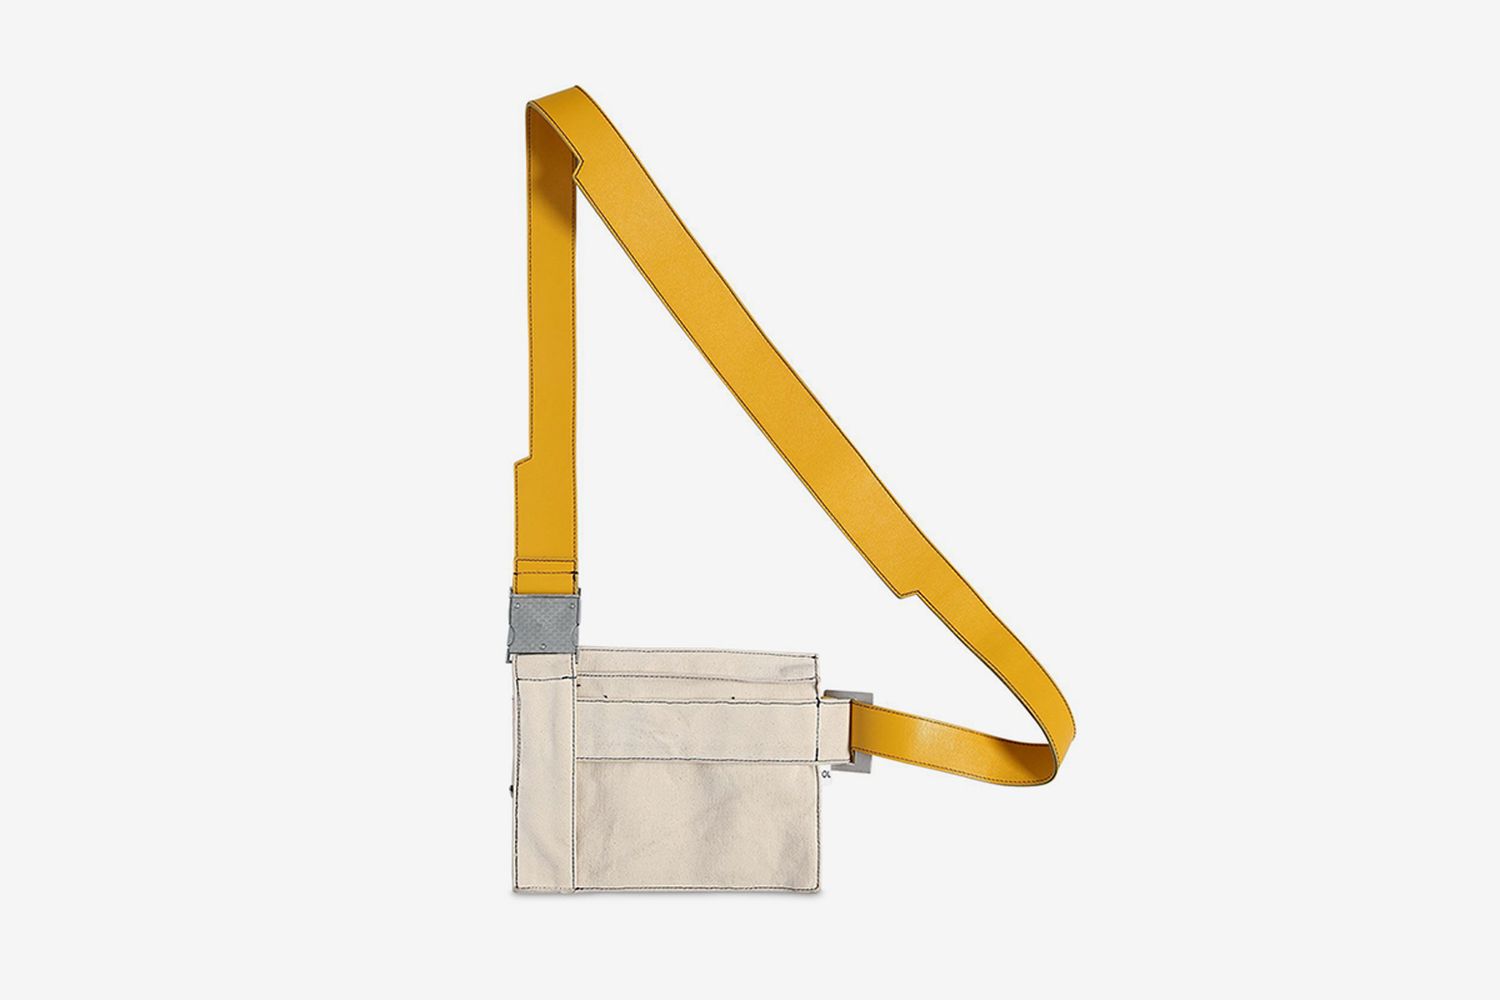 Canvas Holster